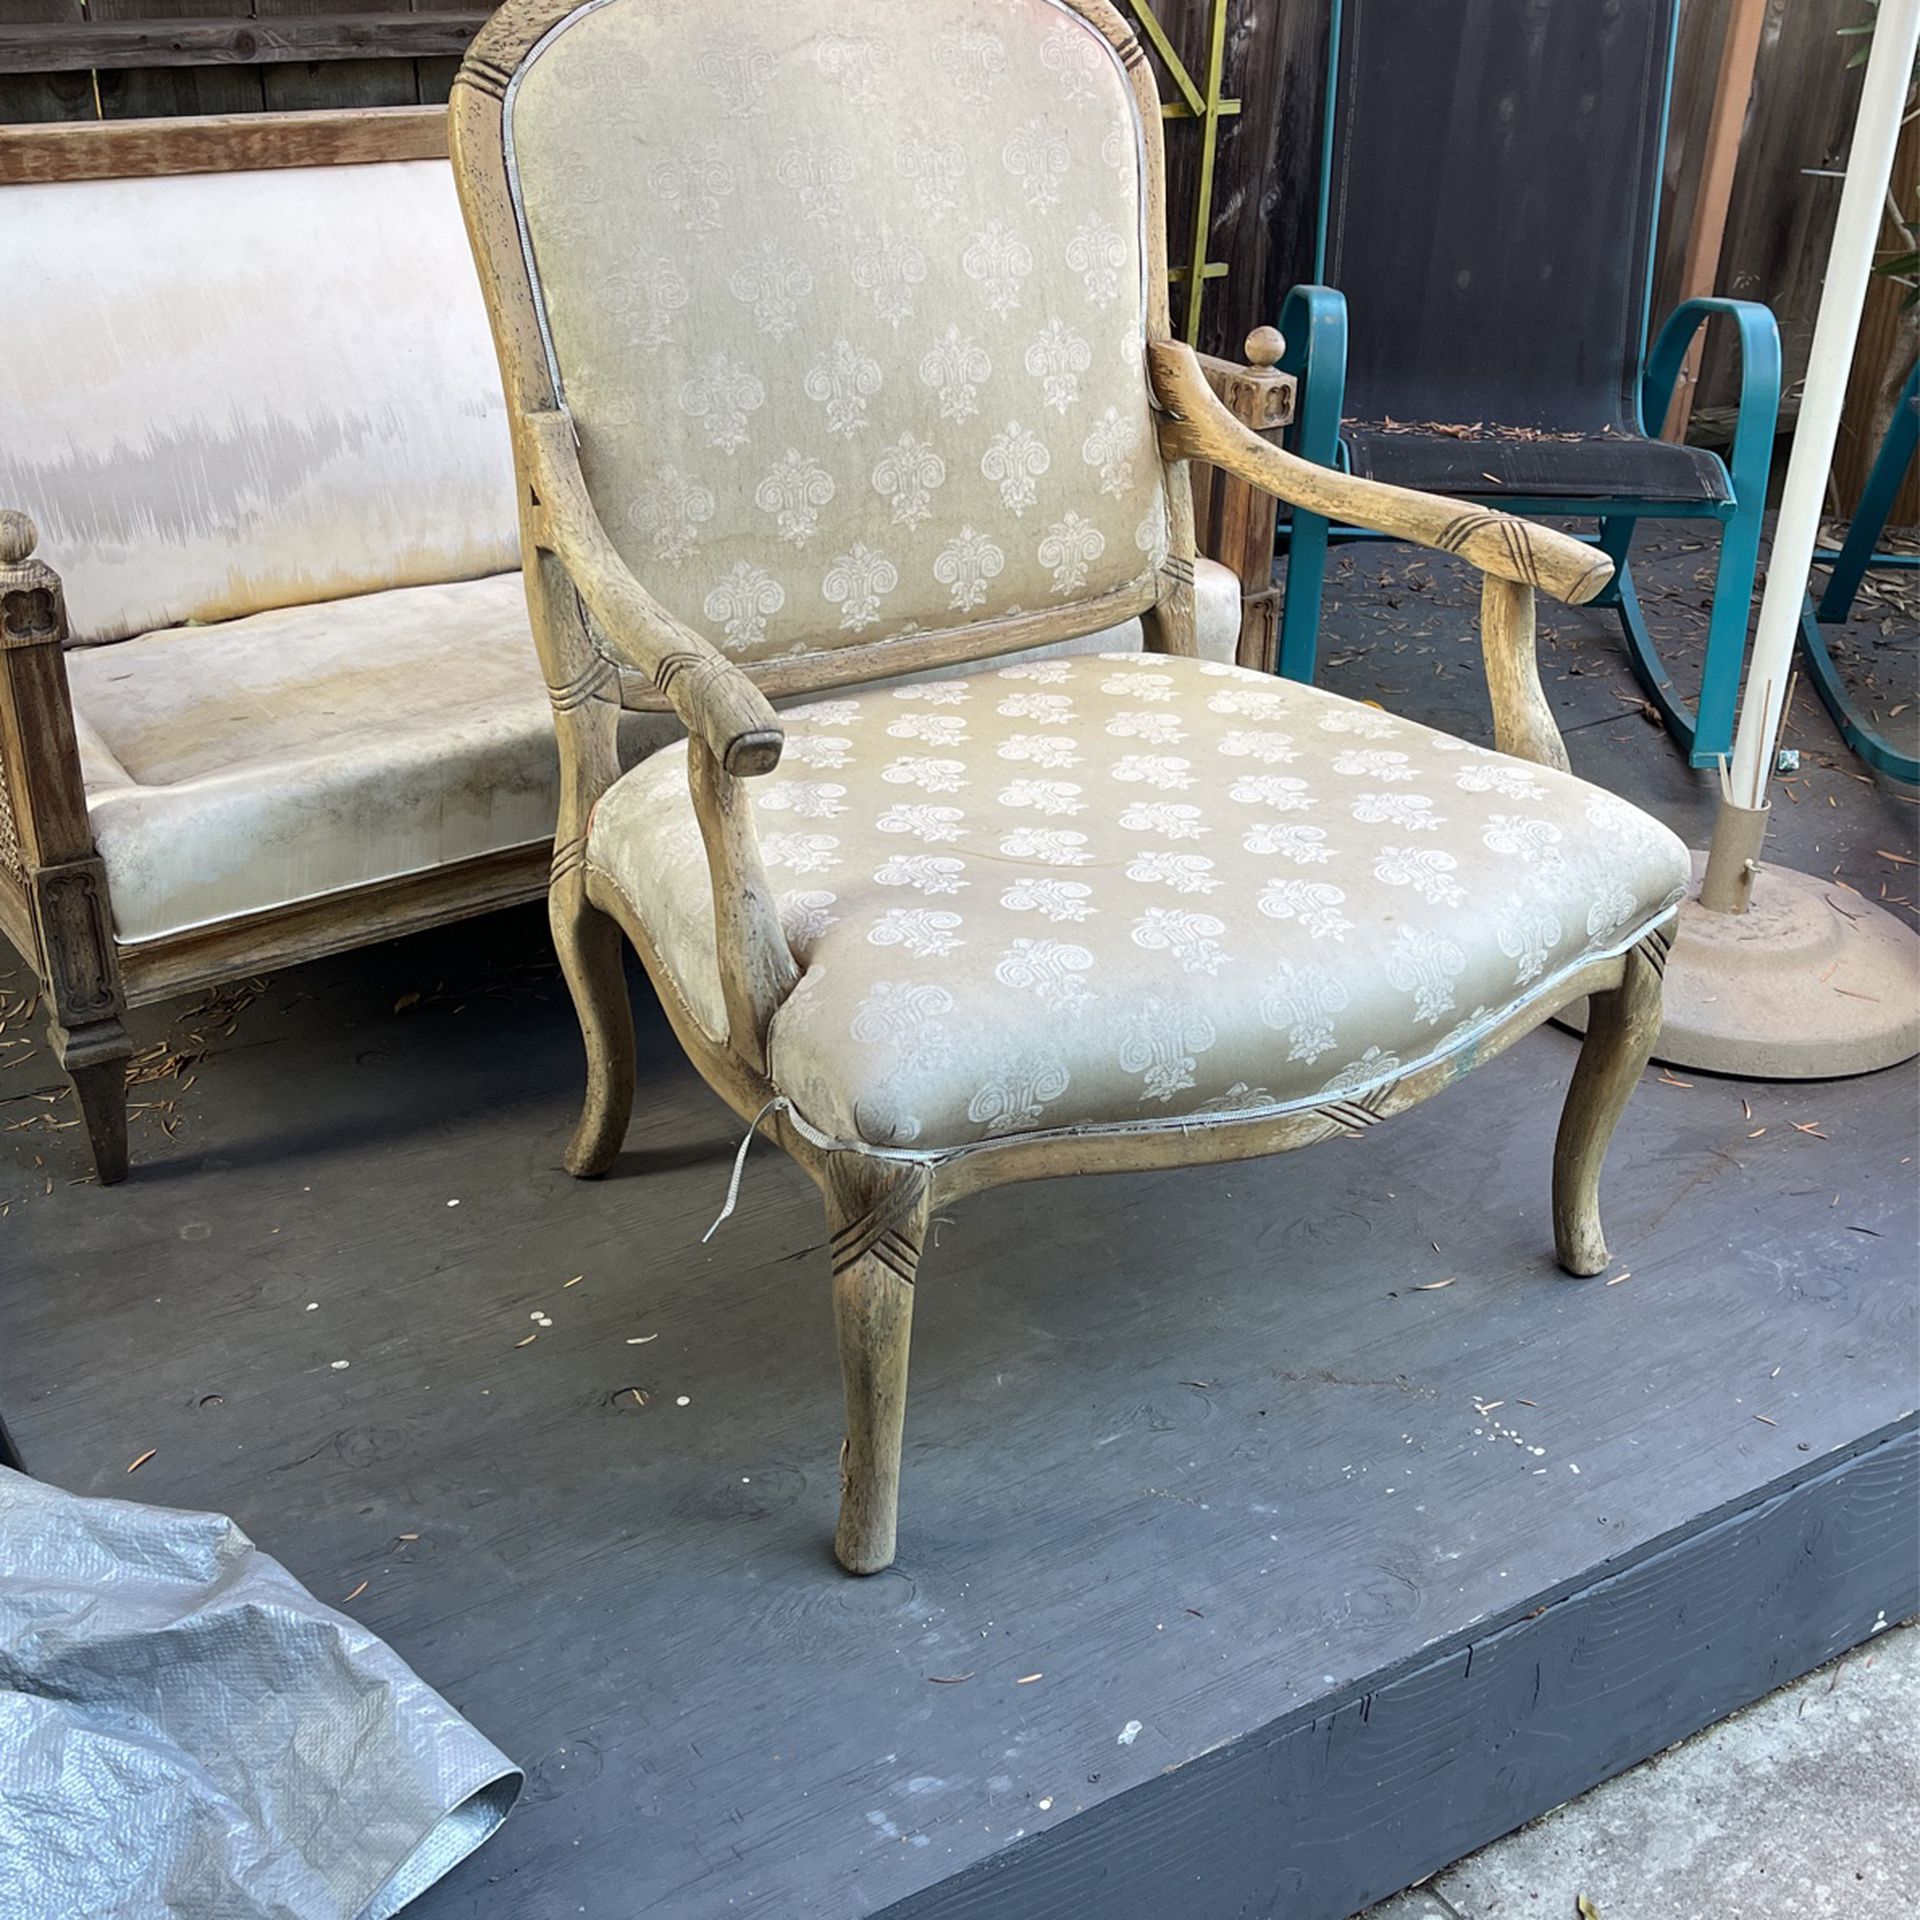 Oversized Vintage Chair 